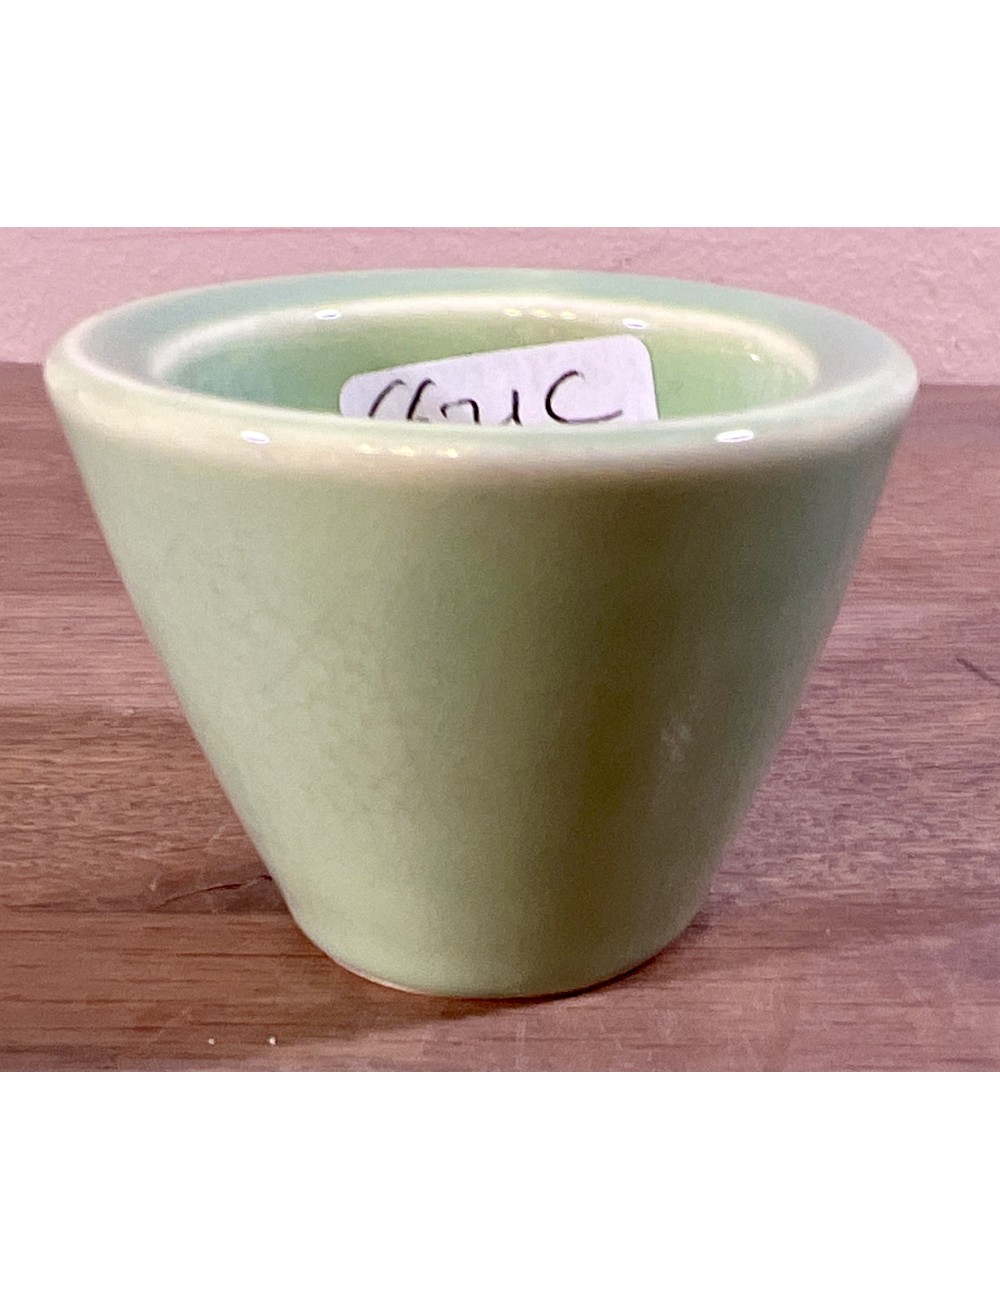 Egg cup - V&B (Villeroy & Boch) Luxembourg - executed in pastel green color